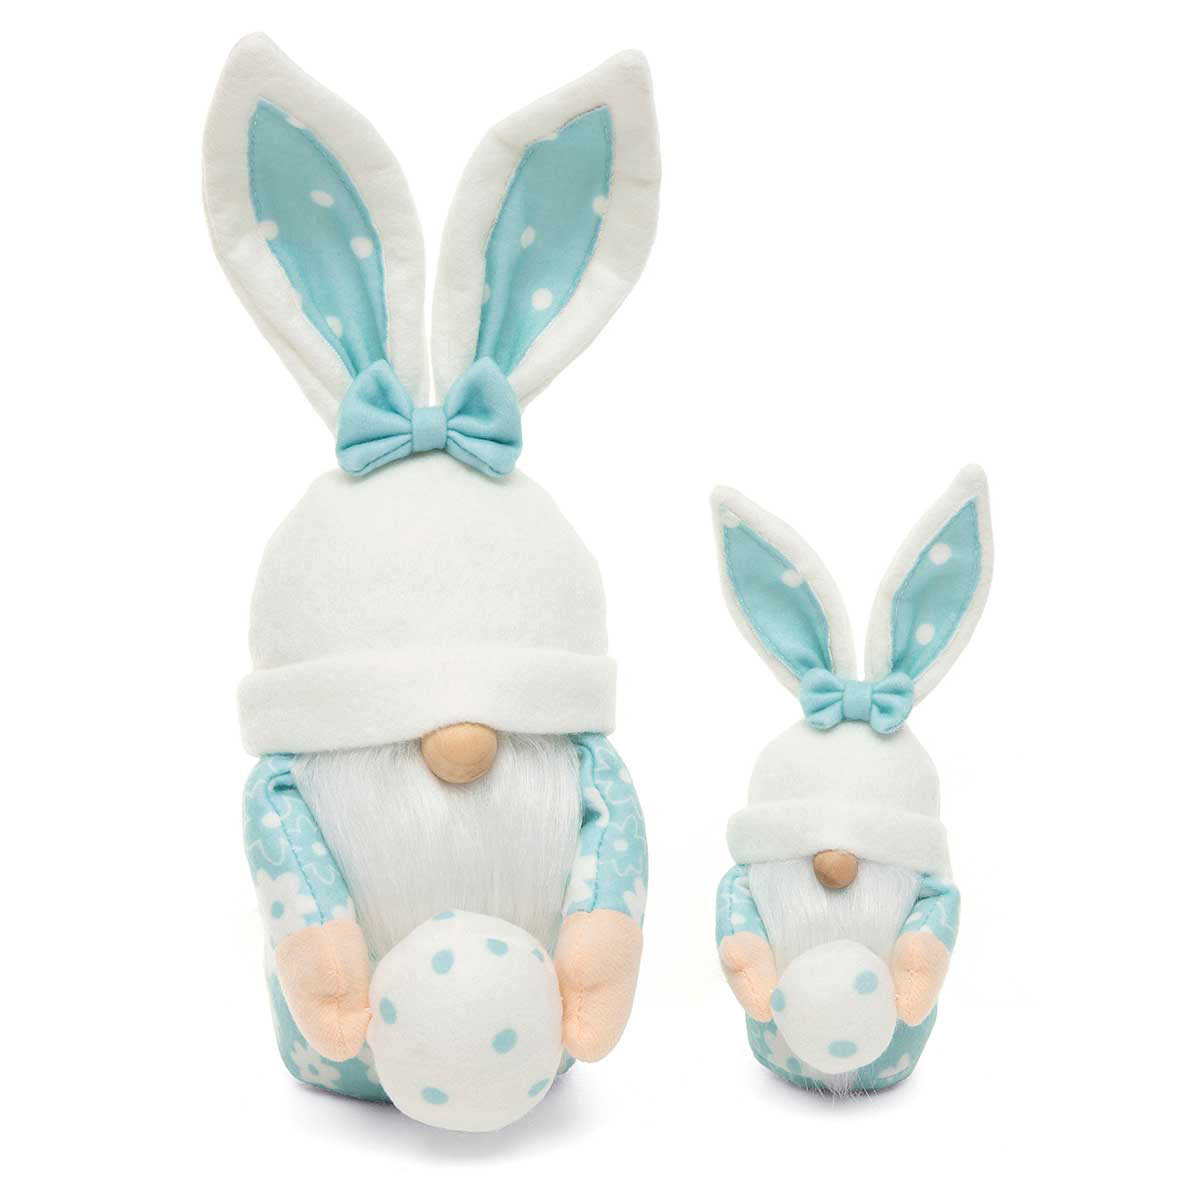 b70 GNOME EASTER BUNNY WITH EGG S 2.25IN X 3.75IN X 6.5IN BLUE/W